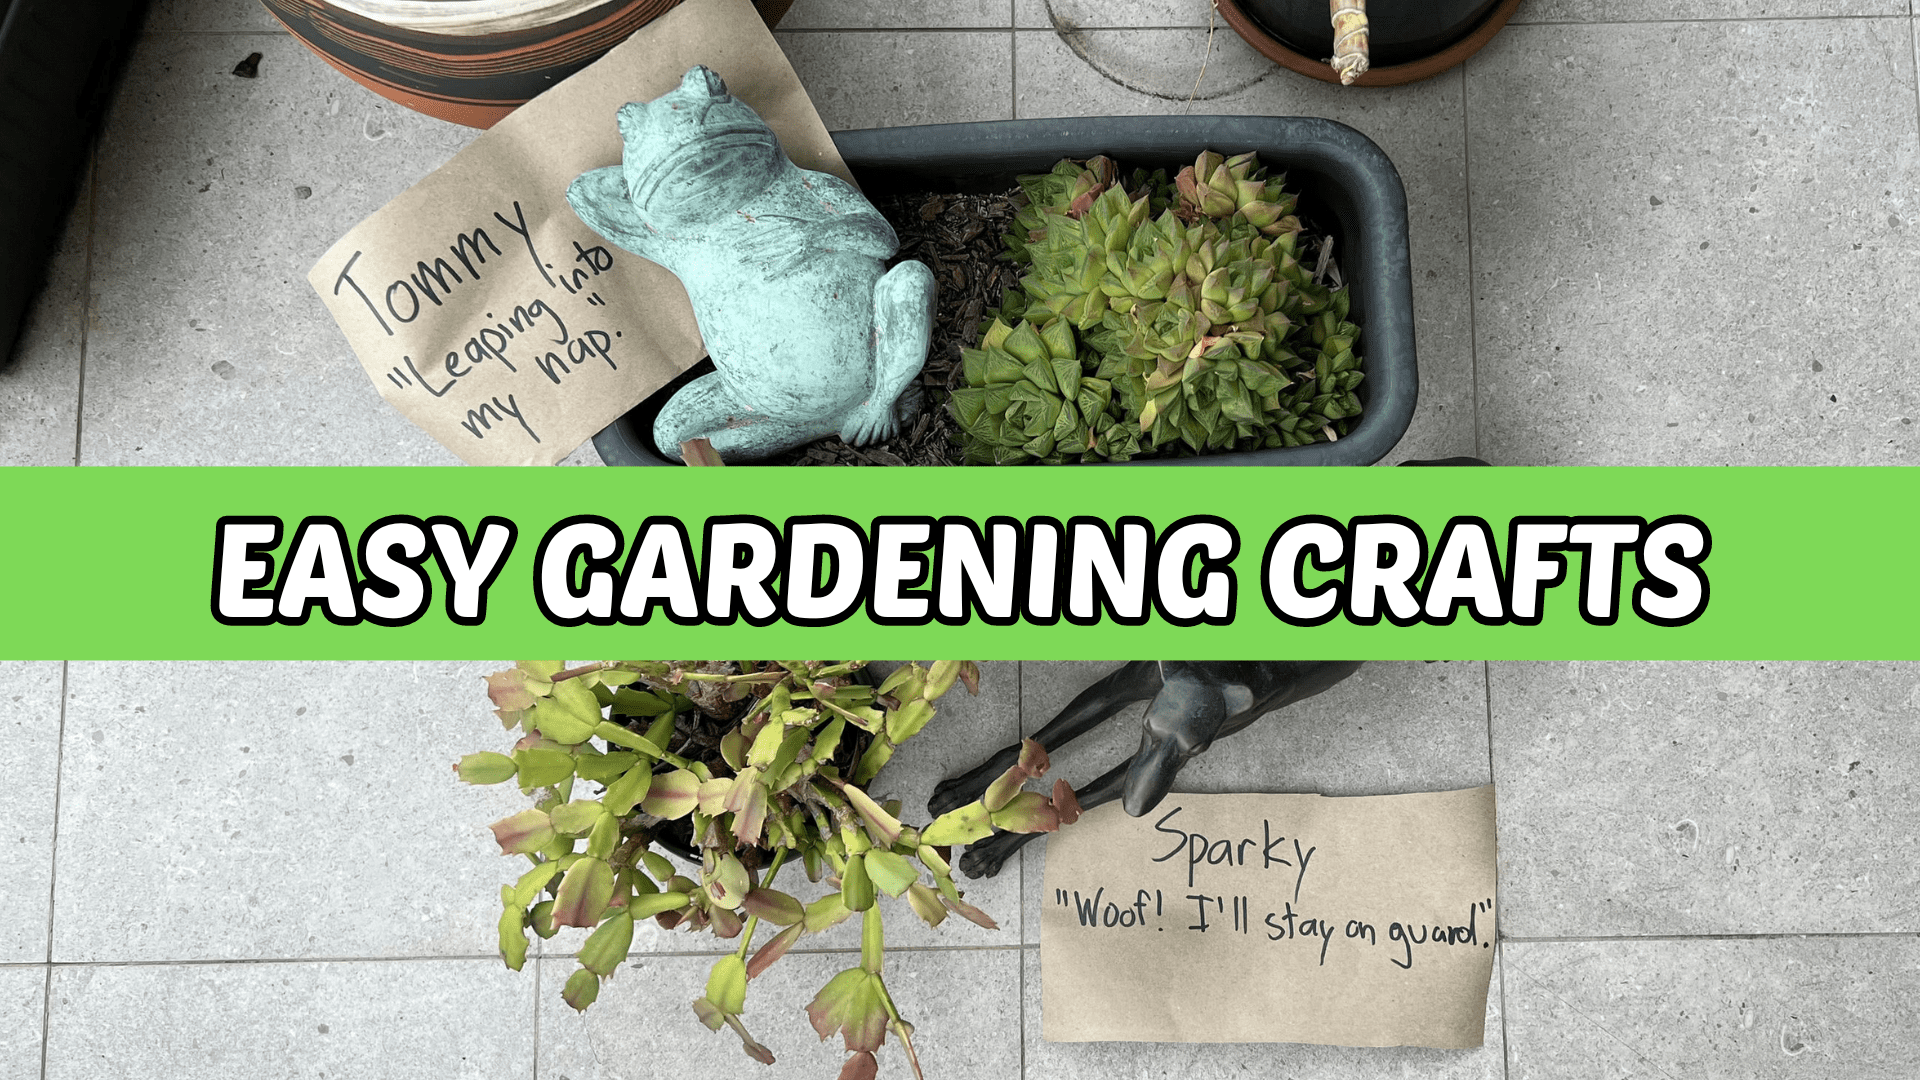 The background photo has frog and dog garden statues next to potted plants. This introduces our easy gardening crafts for kids.